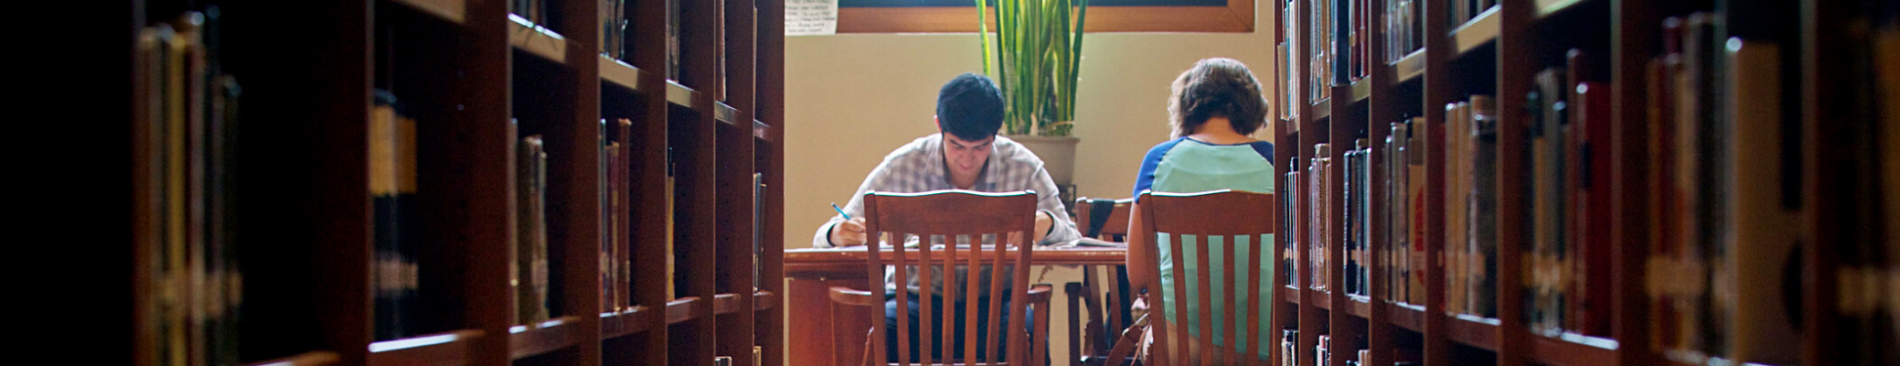 Students studying at table in library